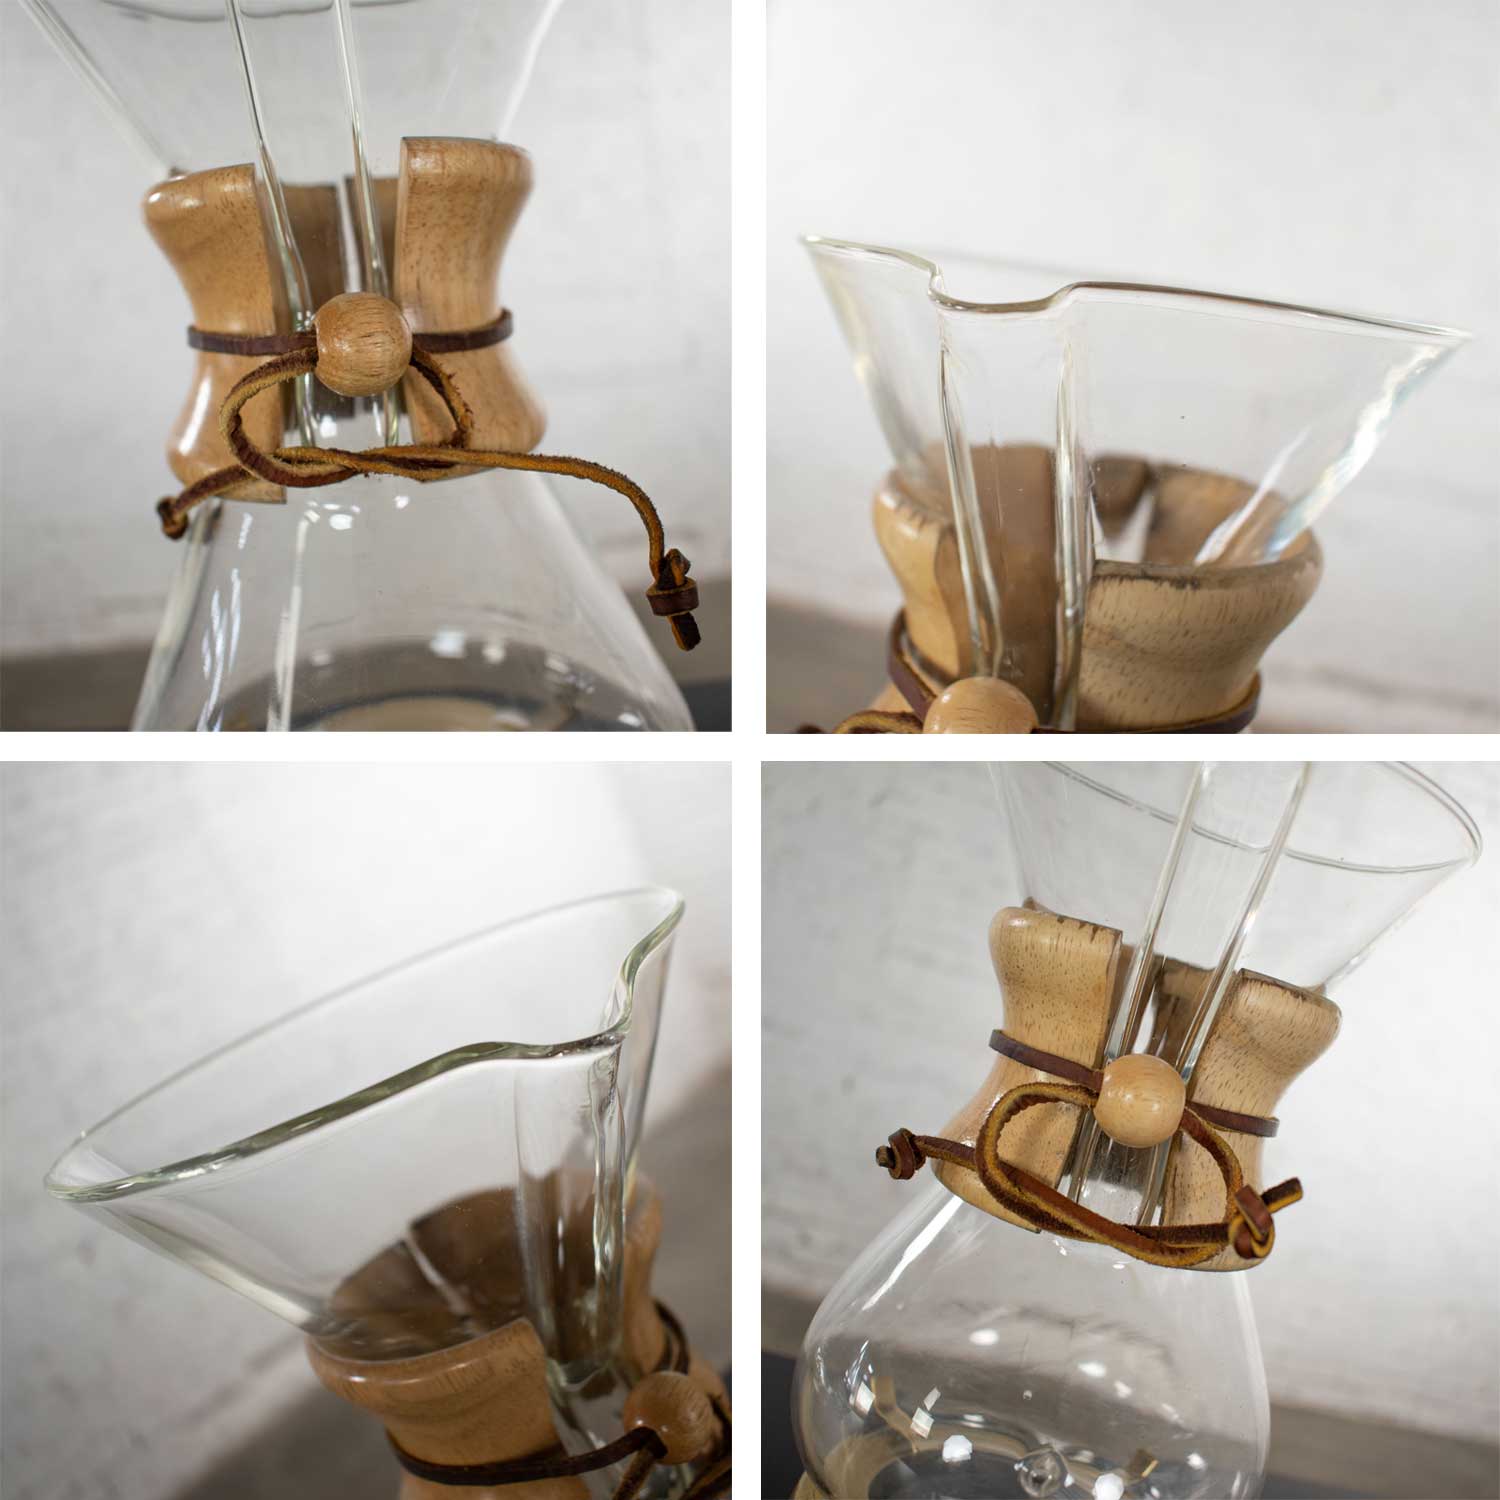 2 Mid Century Modern Chemex Pour Over Coffeemakers by Peter Schlumbohm & Vintage Brass Warmers